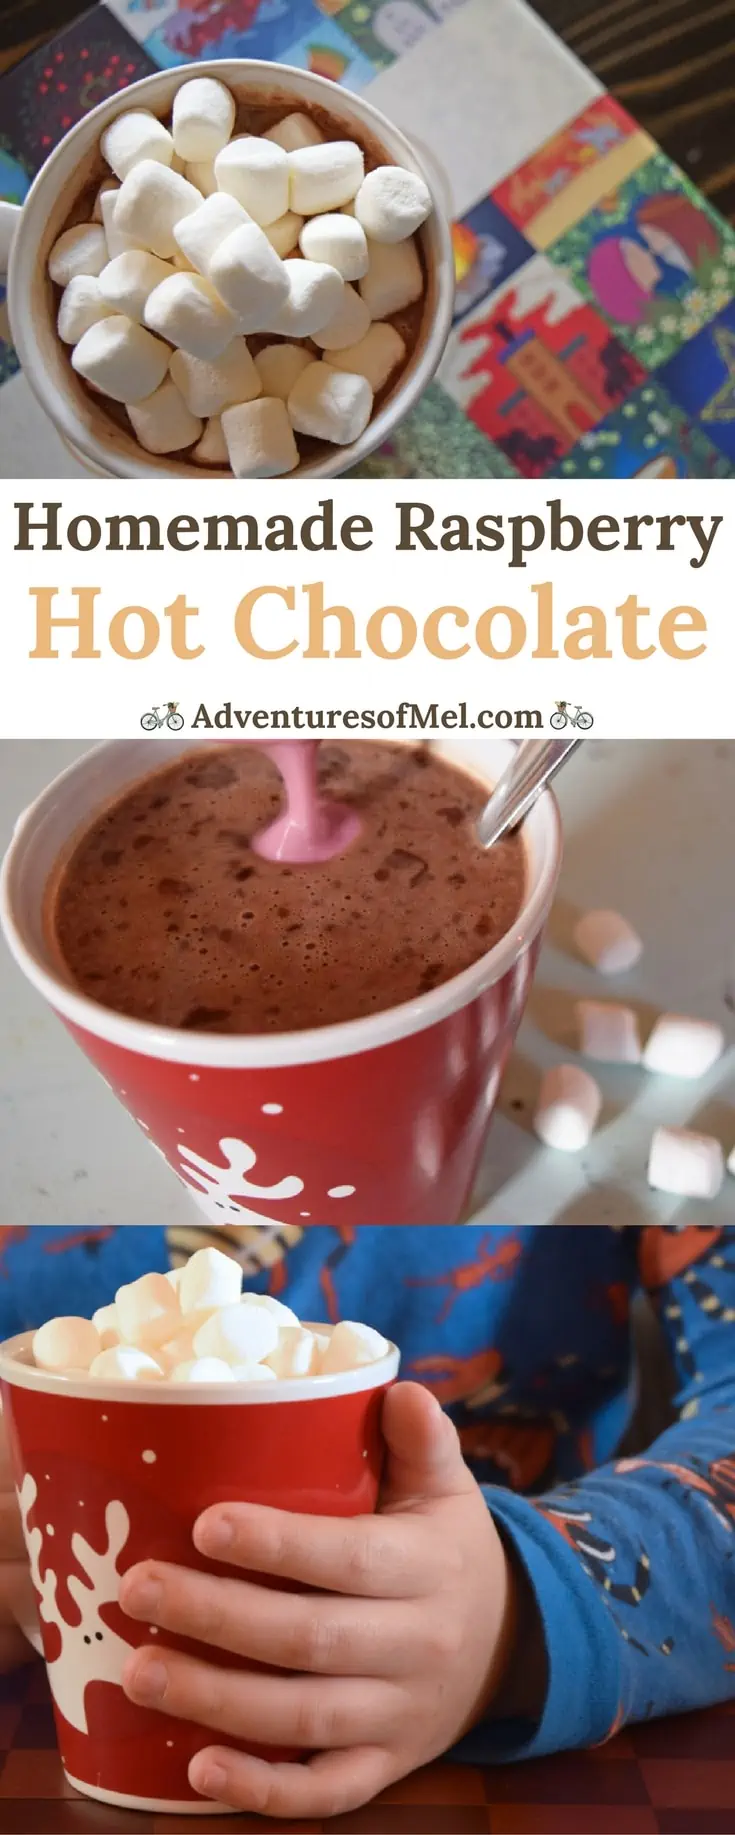 Cozy up with a warm cup of Raspberry Hot Chocolate, a sweet treat and a delicious homemade drink the whole family will love on a cold winter day.